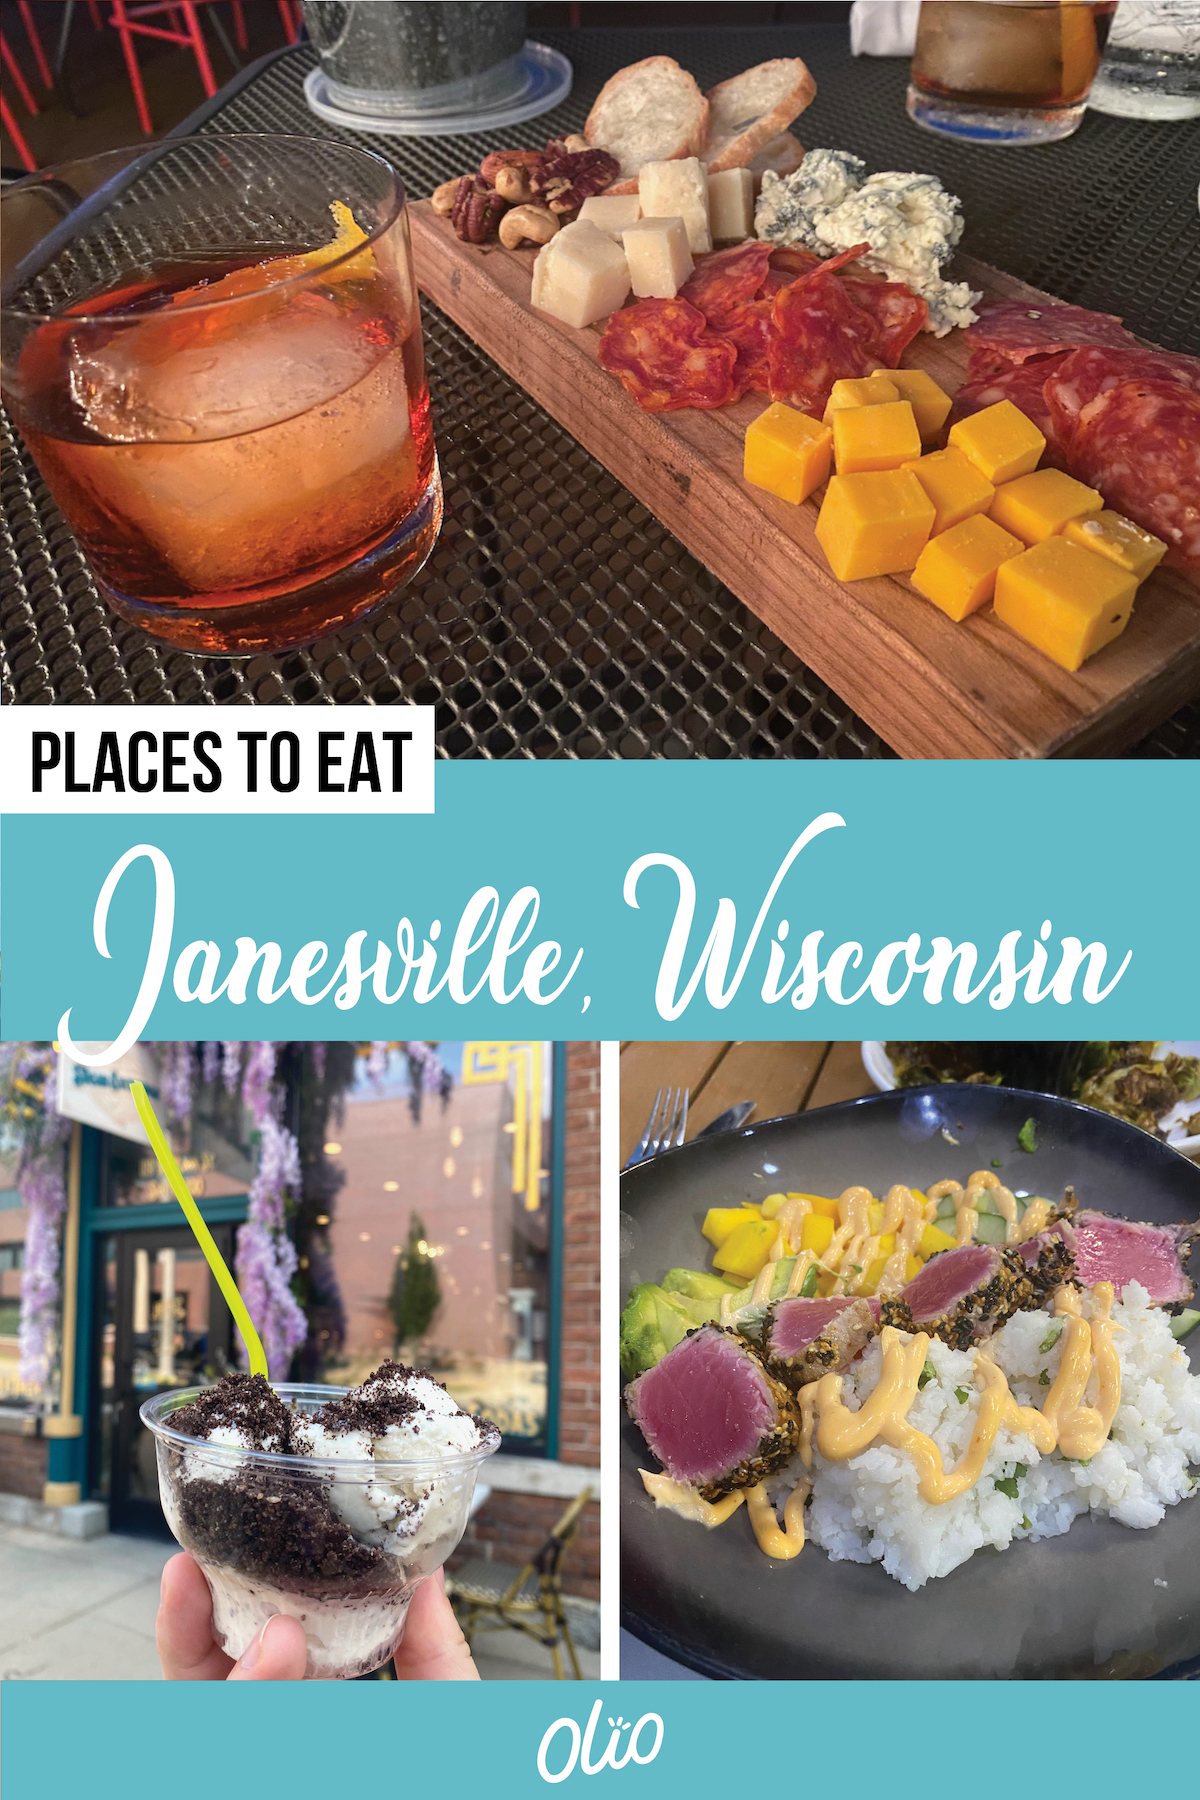 When visiting Wisconsin, there's nothing better than the classics—beer and cheese! Discover eight incredible places to eat in Janesville, Wisconsin. From classy wine bars to mouthwatering sweet shops, there are lots of delicious spots to discover in this small town. #Wisconsin #FoodieFinds